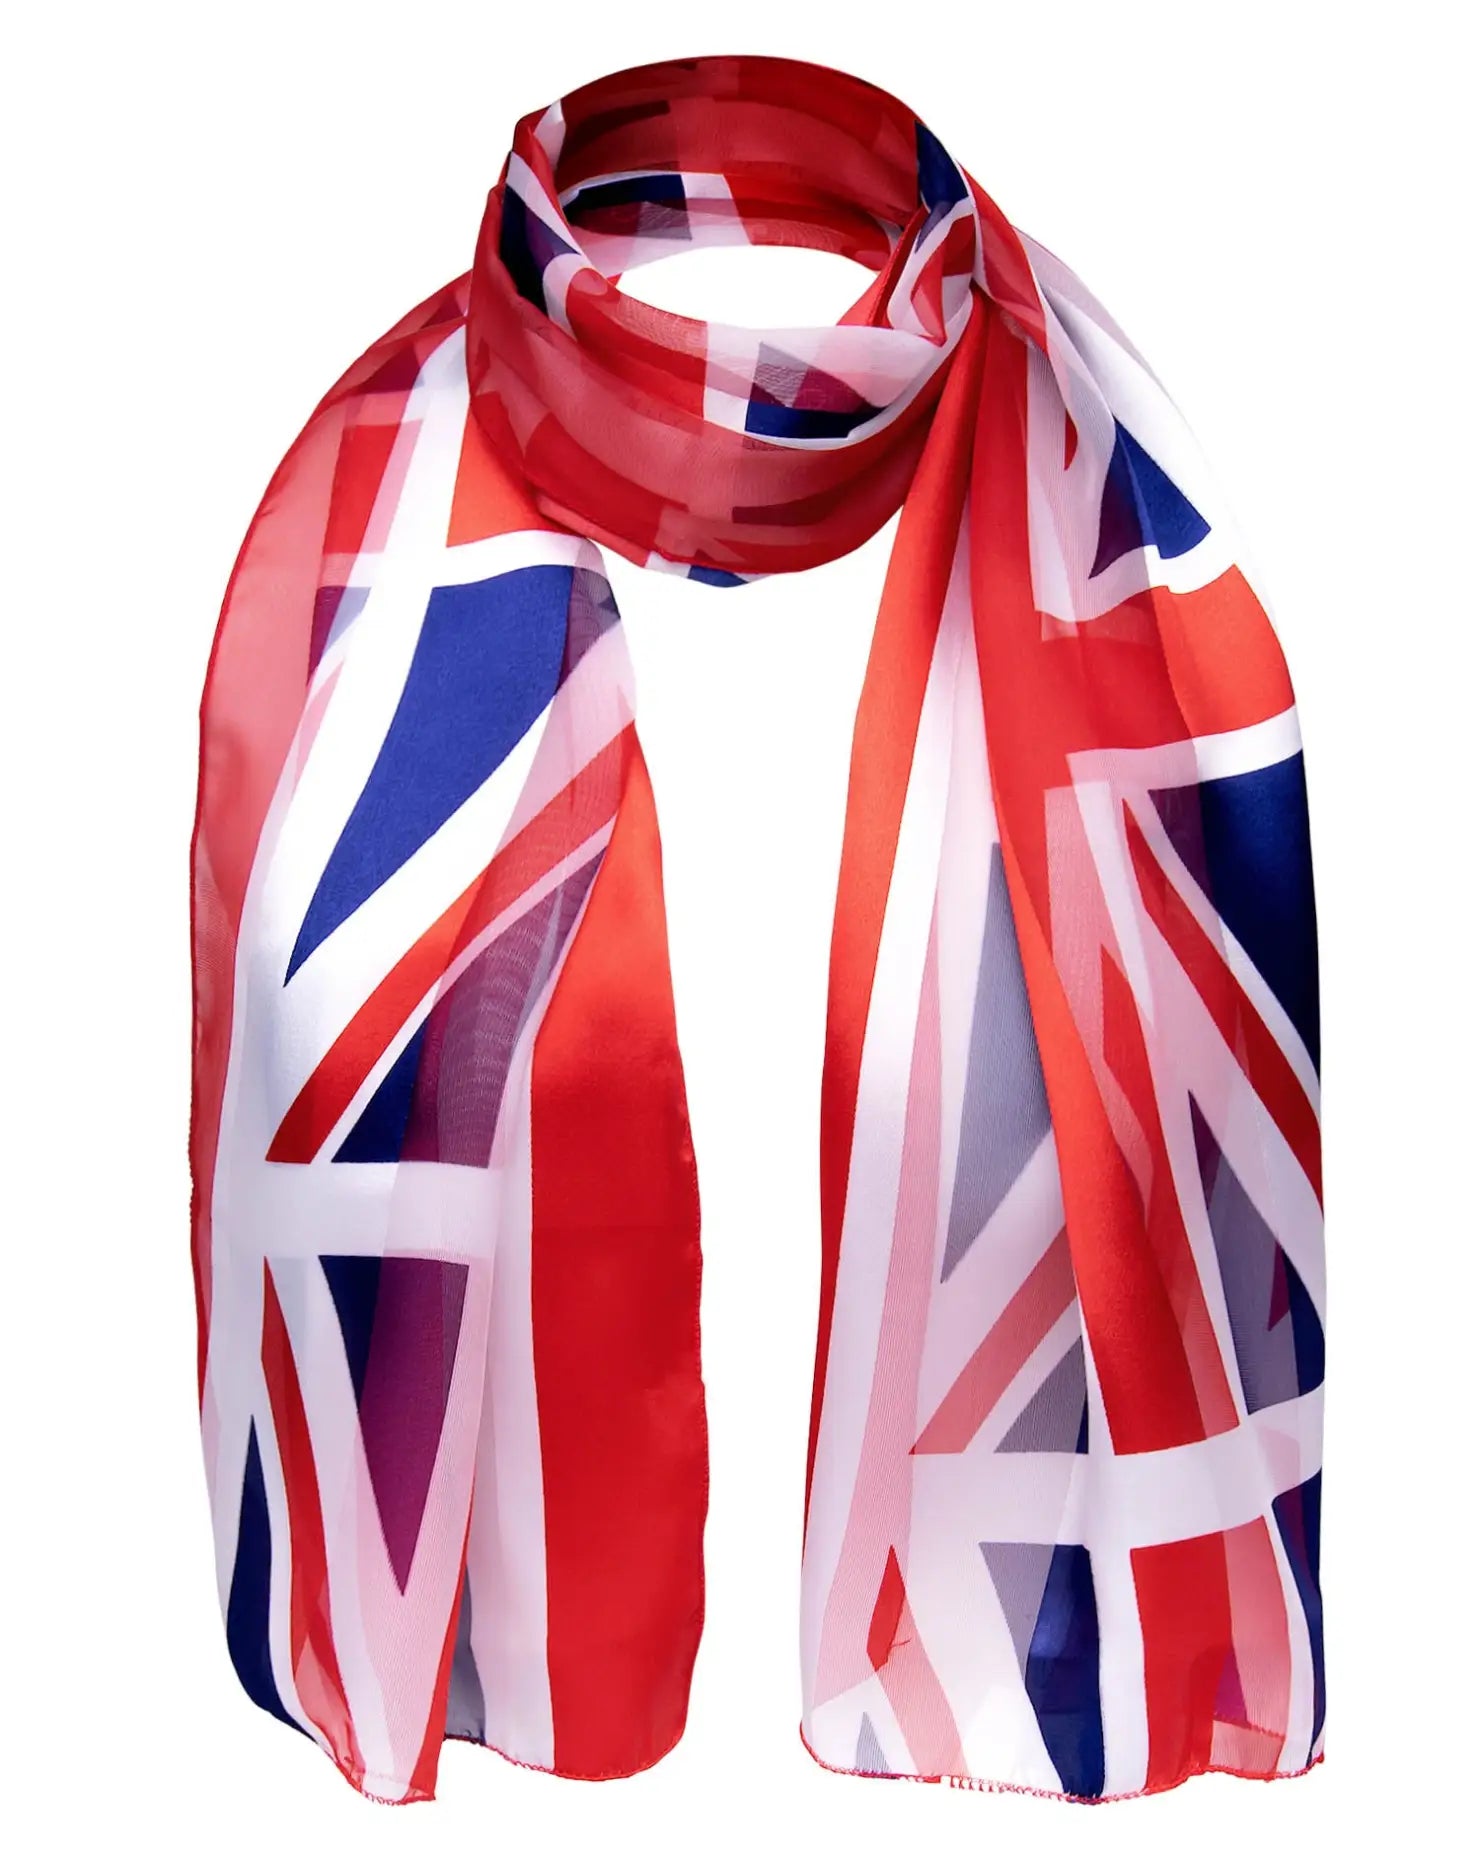 Union Jack Satin Flag Scarf - Patriotic Red, White, and Blue Design